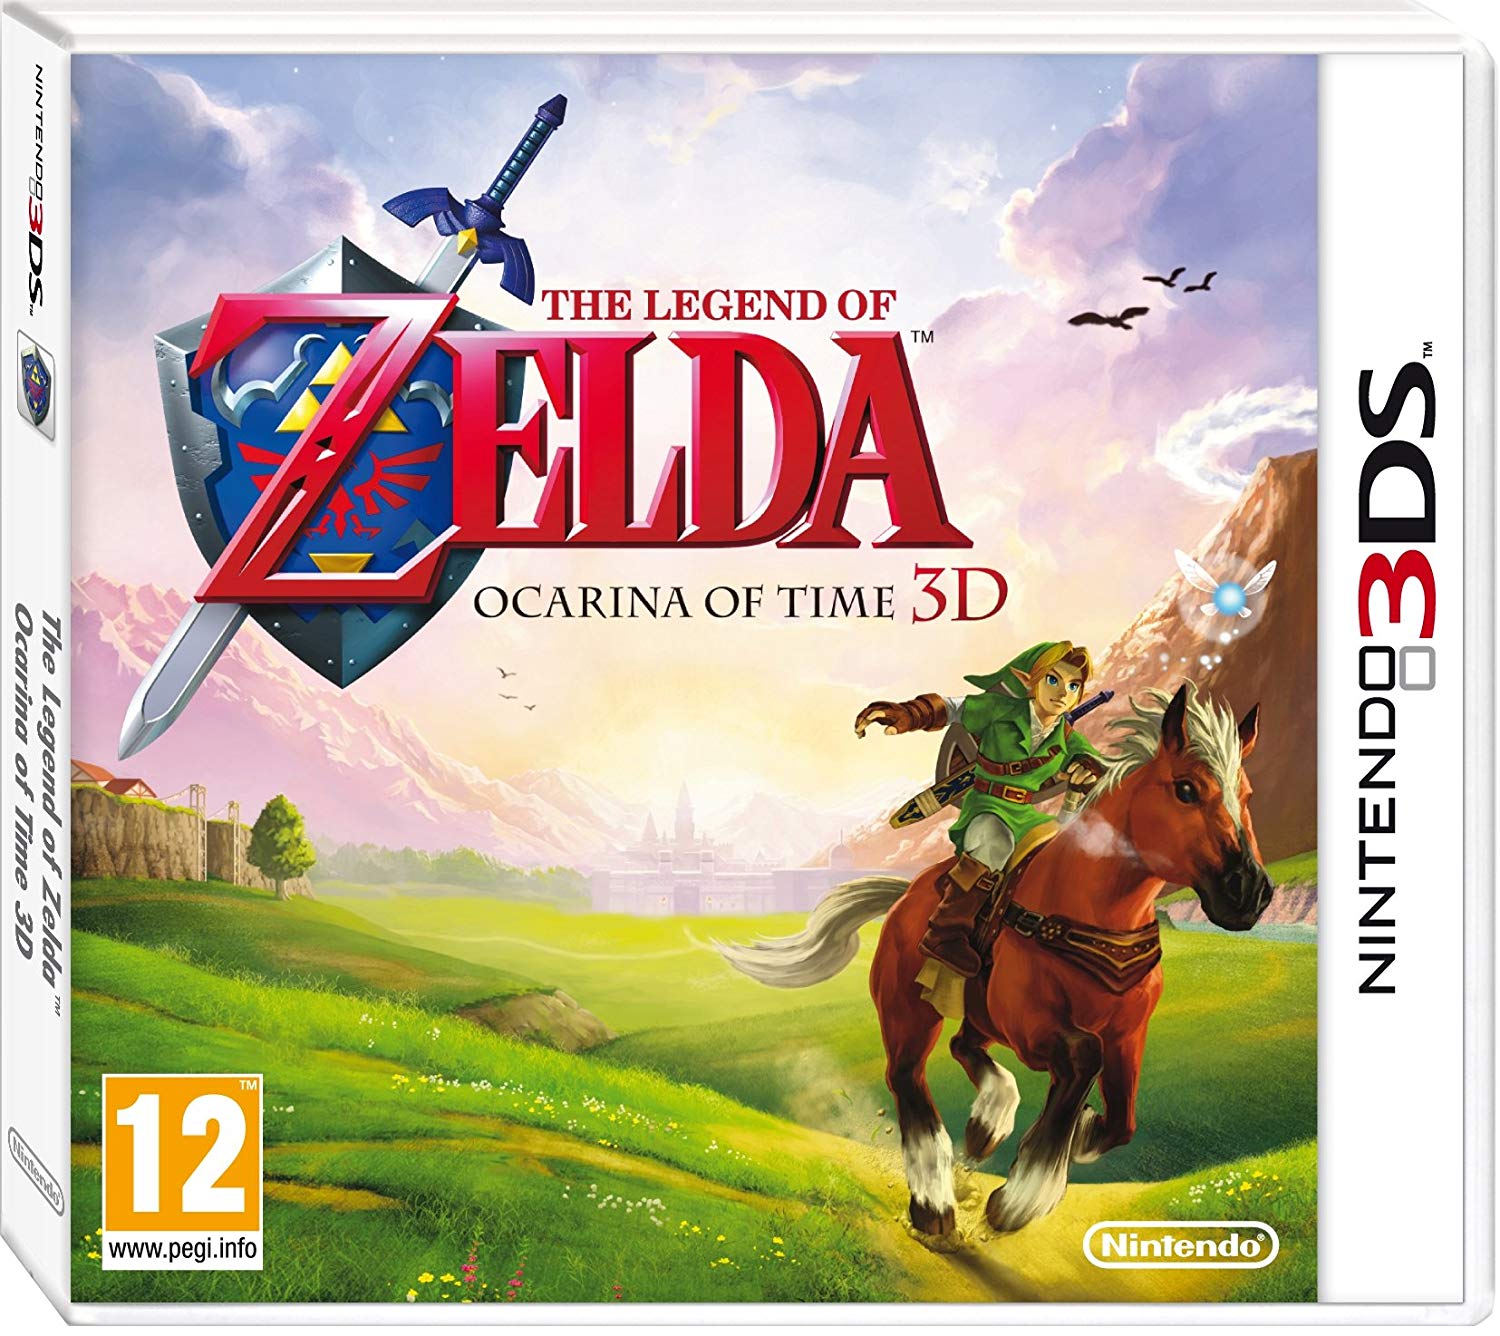 Review | The Legend of Zelda: Ocarina of Time